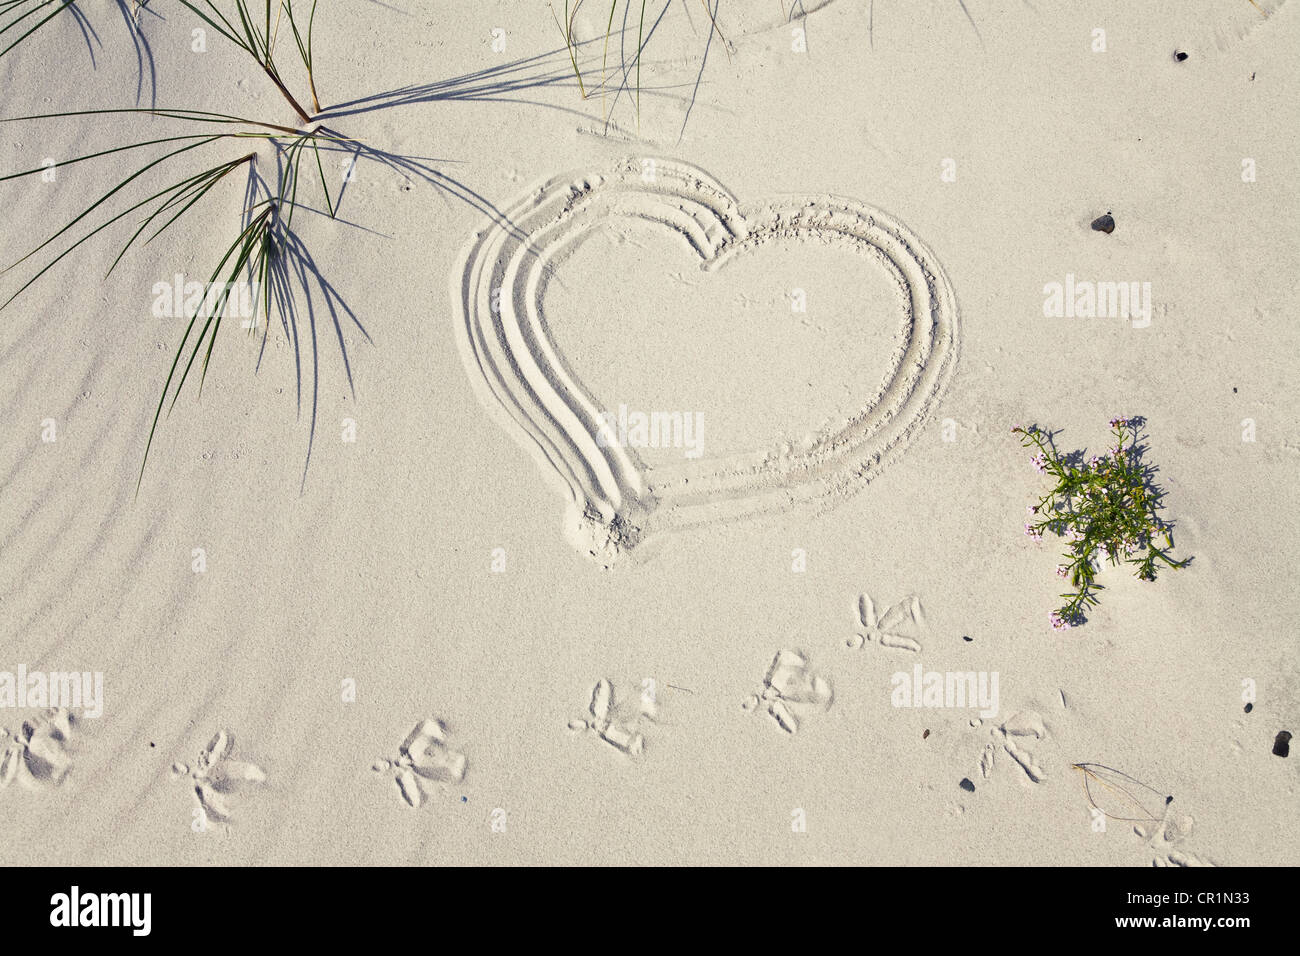 Heart symbol in sand with gull track on the beach, Bornholm, Denmark, Europe Stock Photo